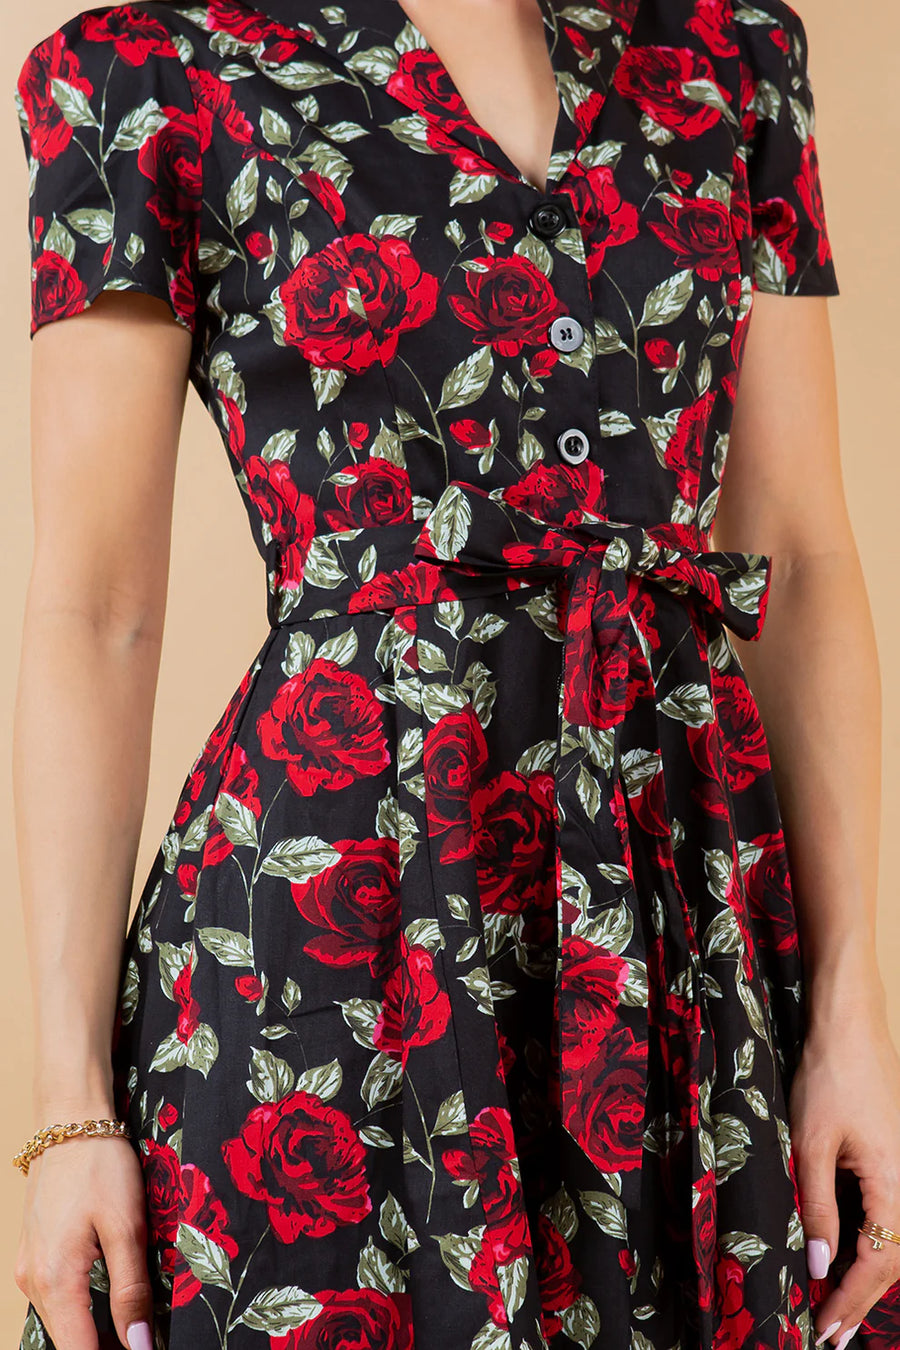 Thora | Vintage Rose Fit and Flare Dress